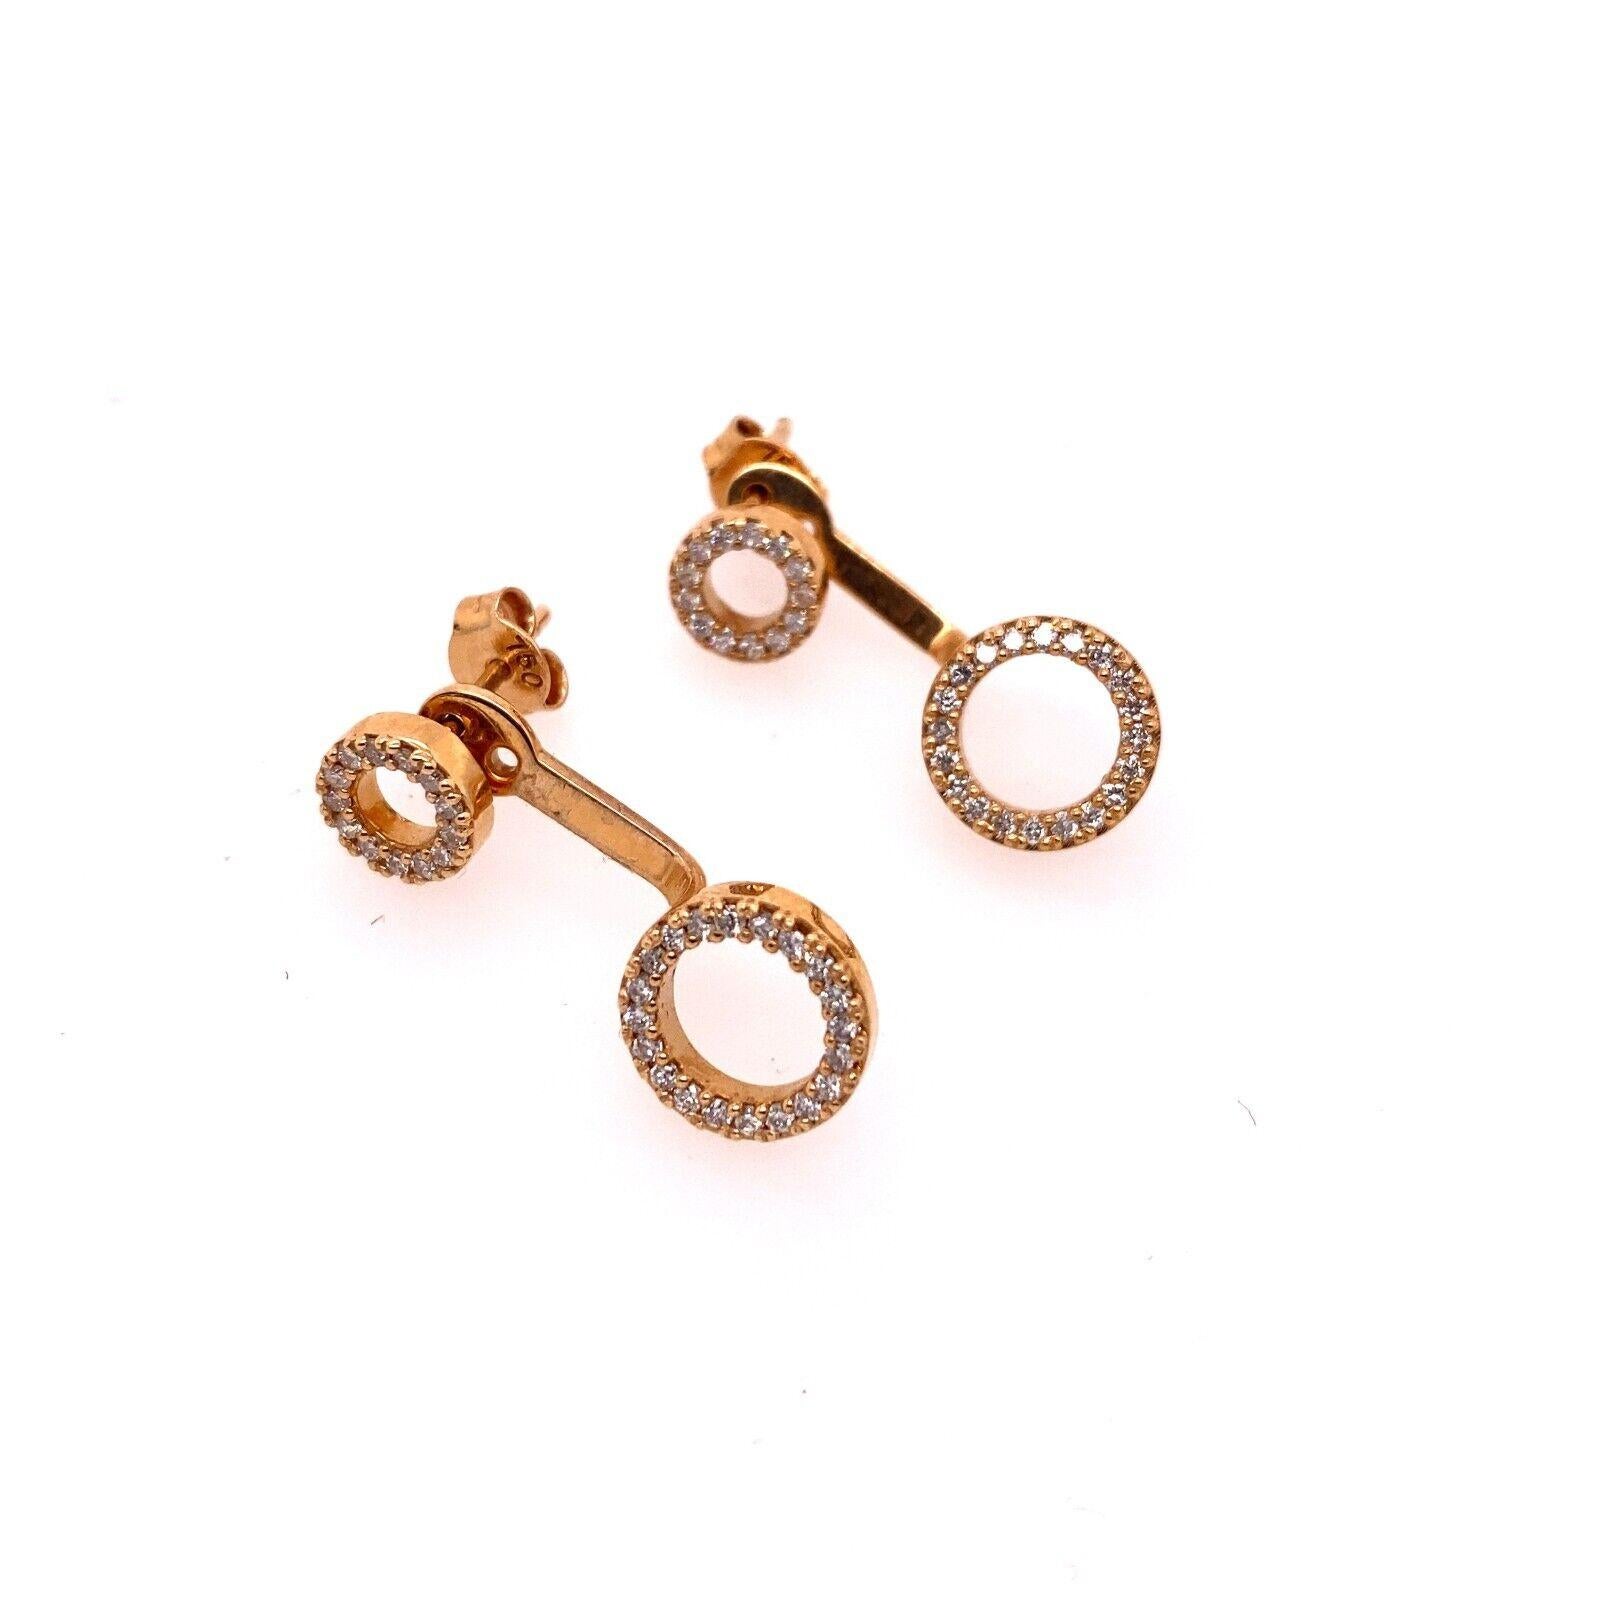 Fine Quality Drops & Studs Earring Set with 0.68ct of Diamonds in 18ct Yellow Gold.
This is a pair of 18ct Rose Gold drop & studs earrings set with 0.68ct of Round Brilliant Cut Diamonds. 
Additional Information:
Total Diamond Weight: 0.68ct
Diamond